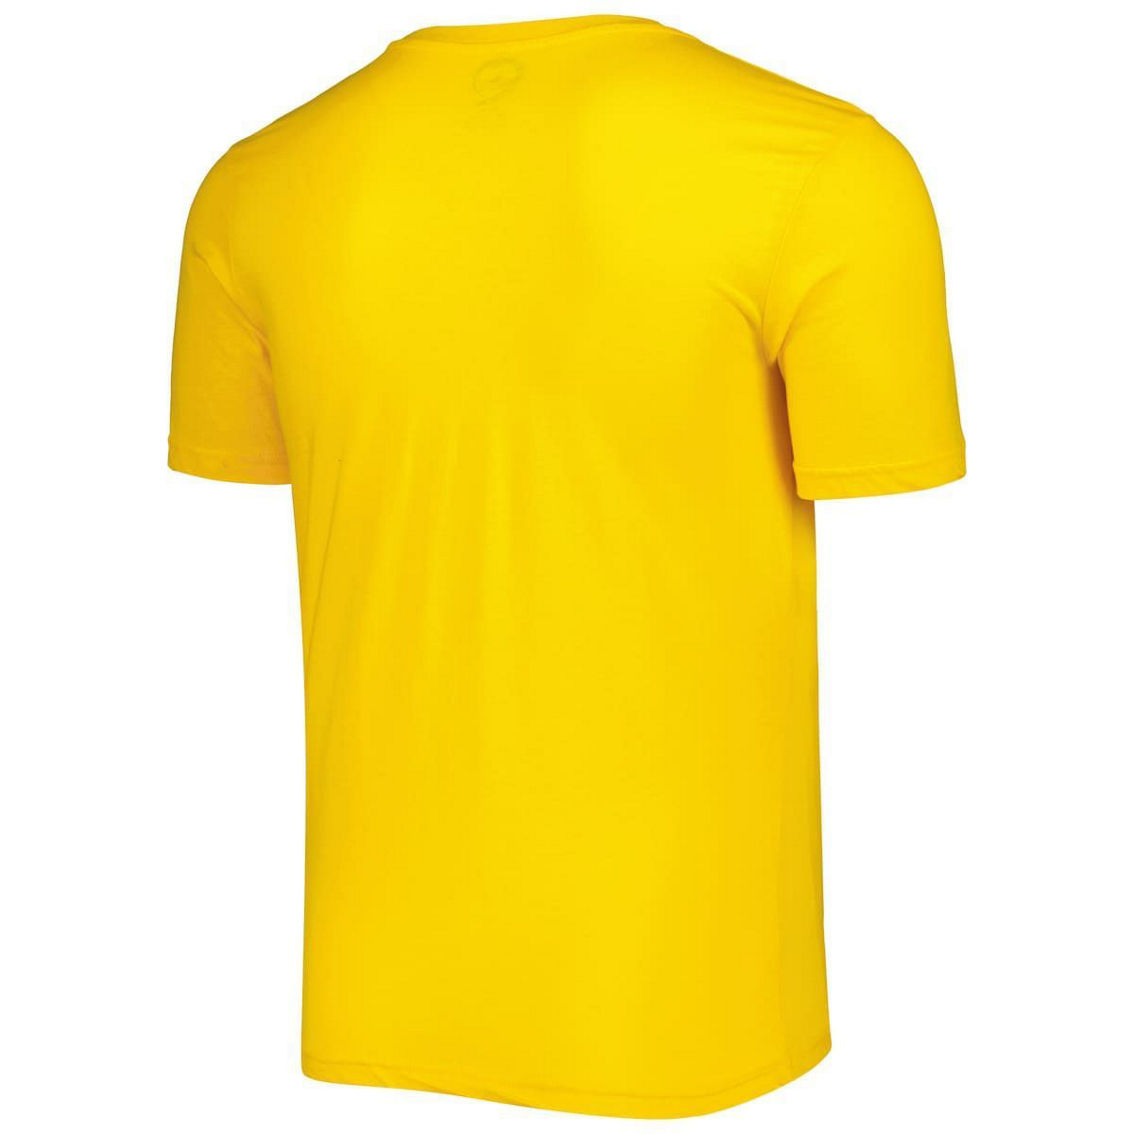 Outerstuff Men's Yellow FIFA World Cup Qatar 2022 Around The World T-Shirt - Image 4 of 4